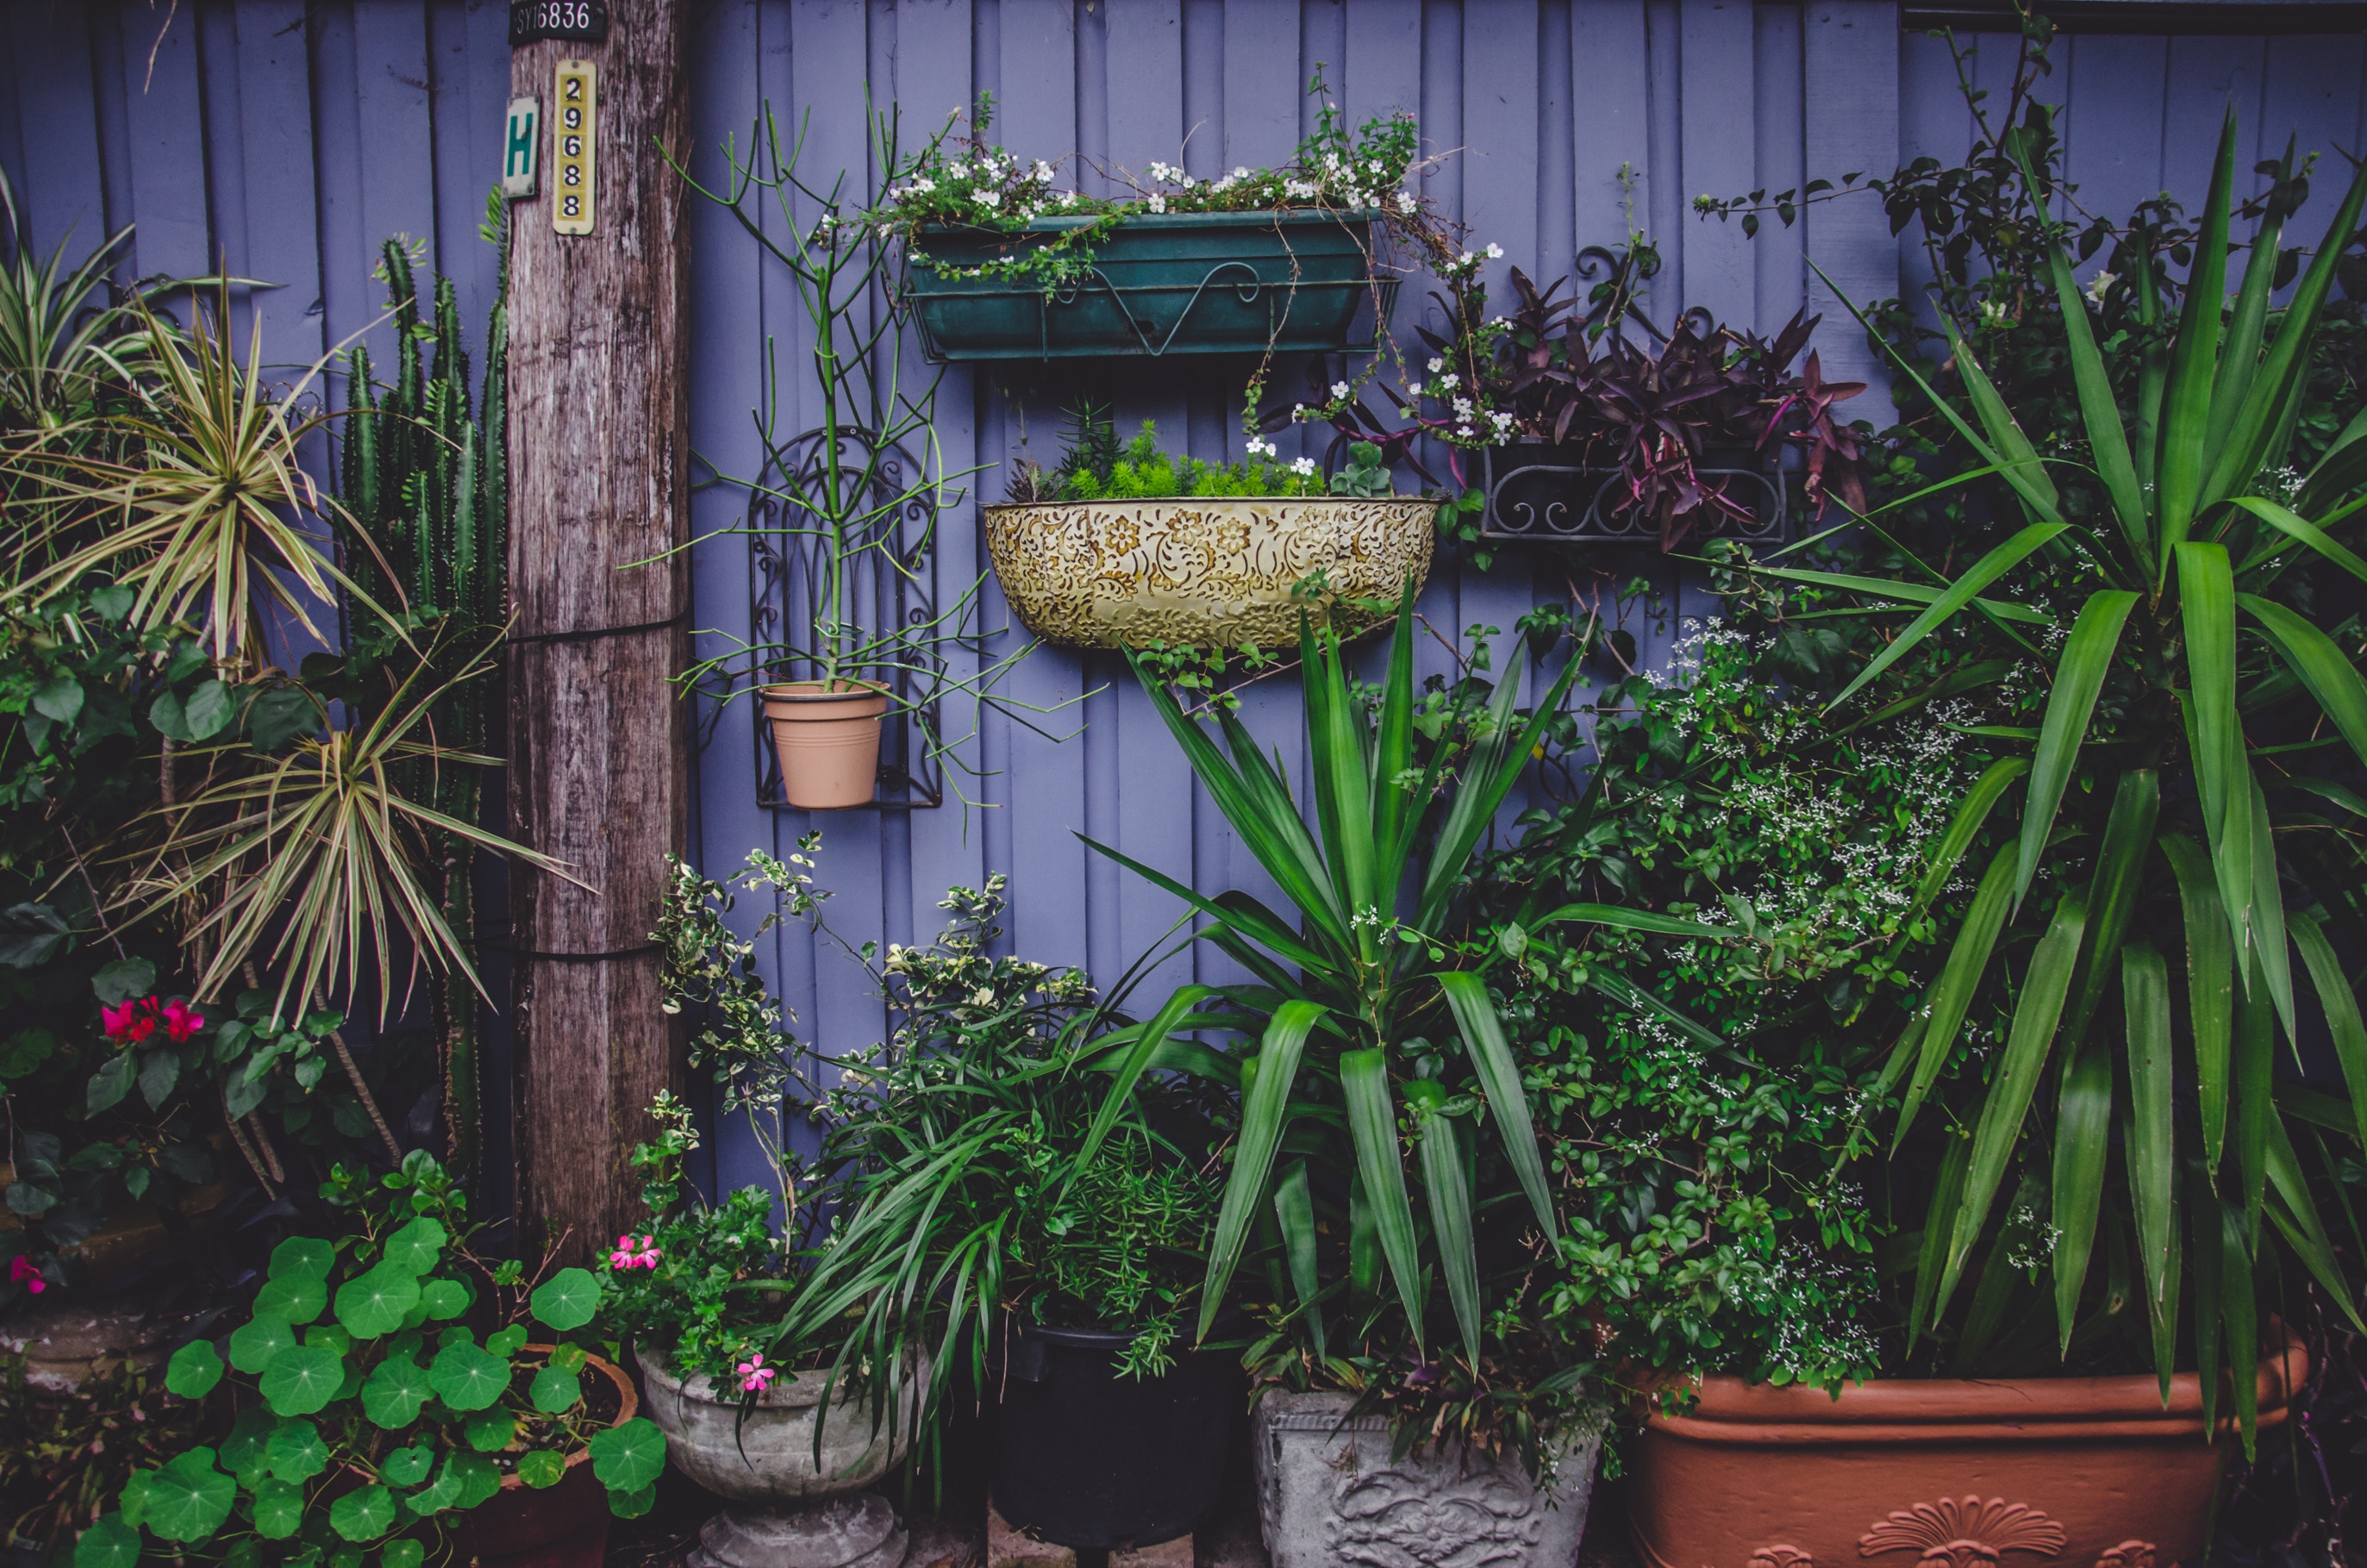 Top 2019 Garden Trends to Try Out in Your Collingwood Garden